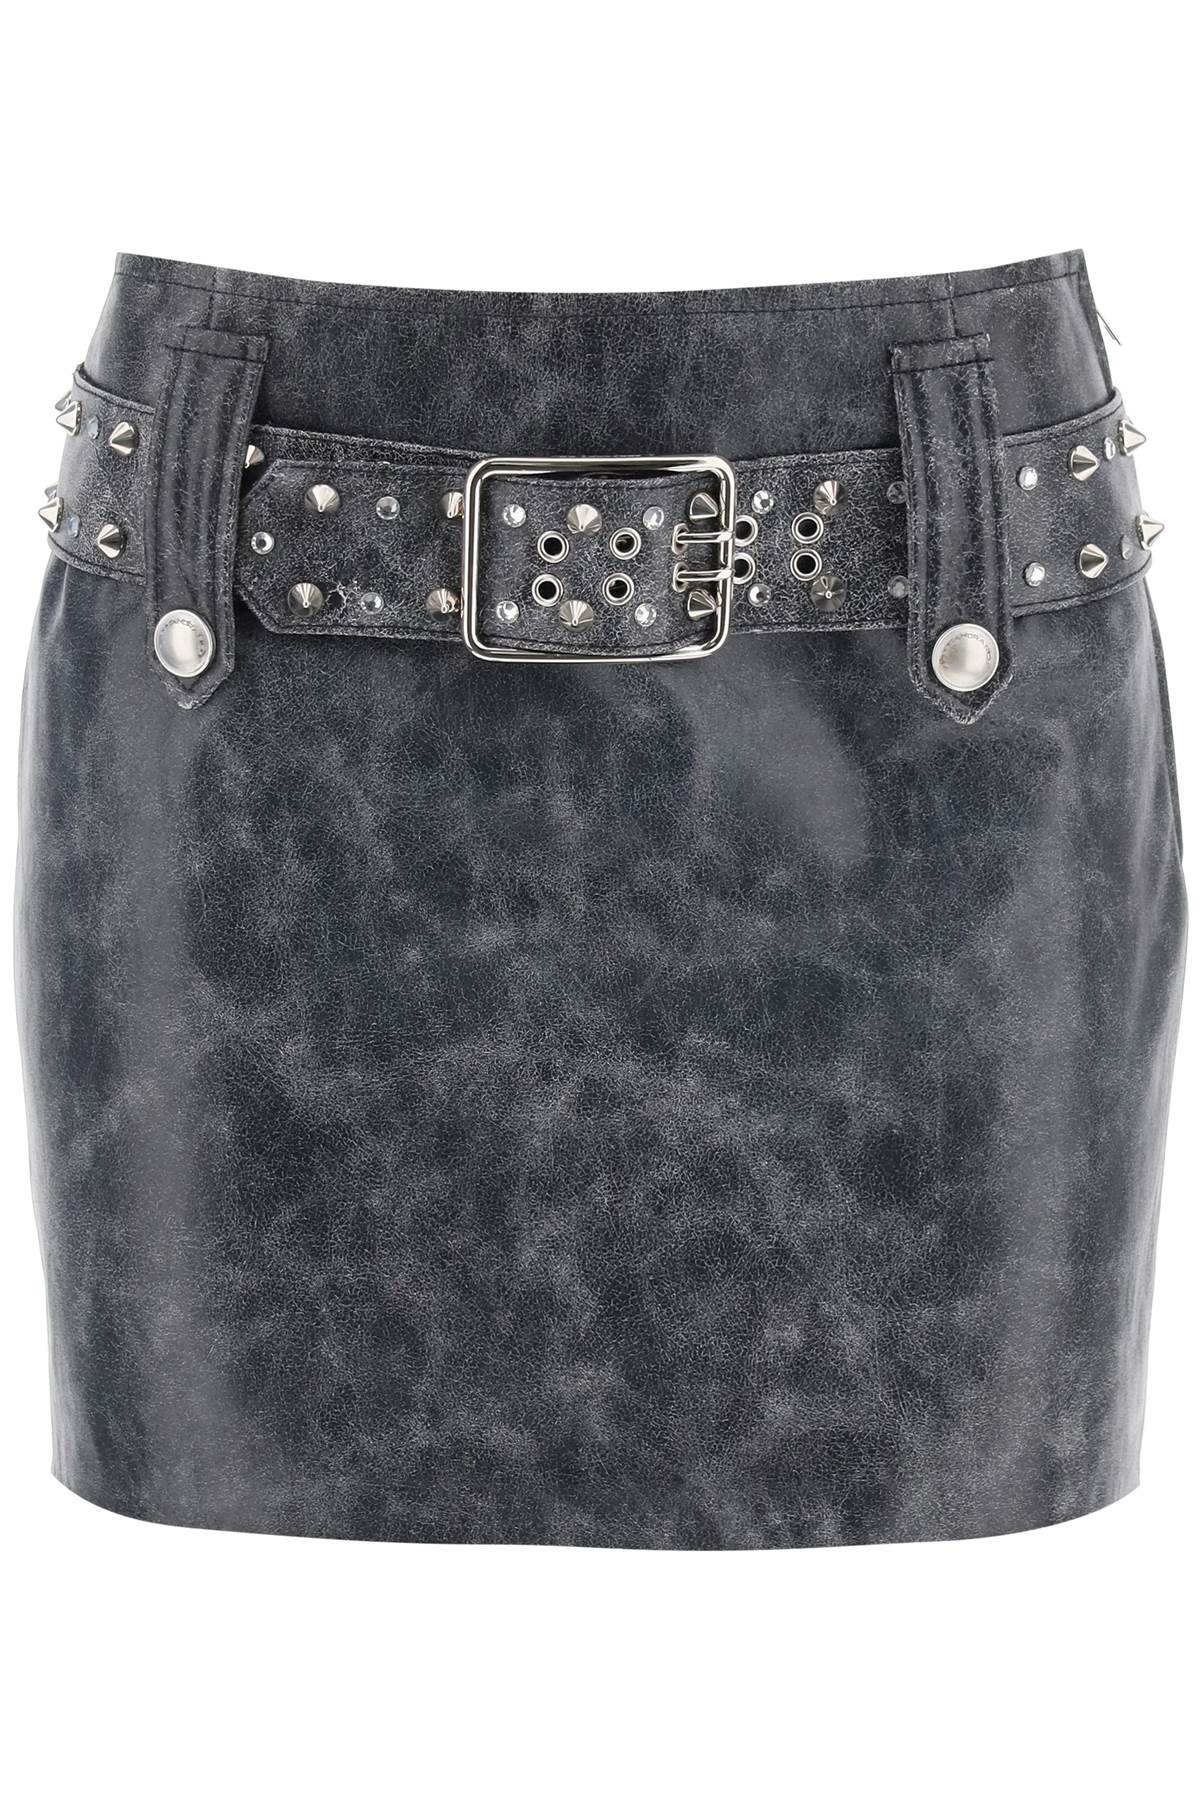 Alessandra rich leather mini skirt with belt and appliques-0